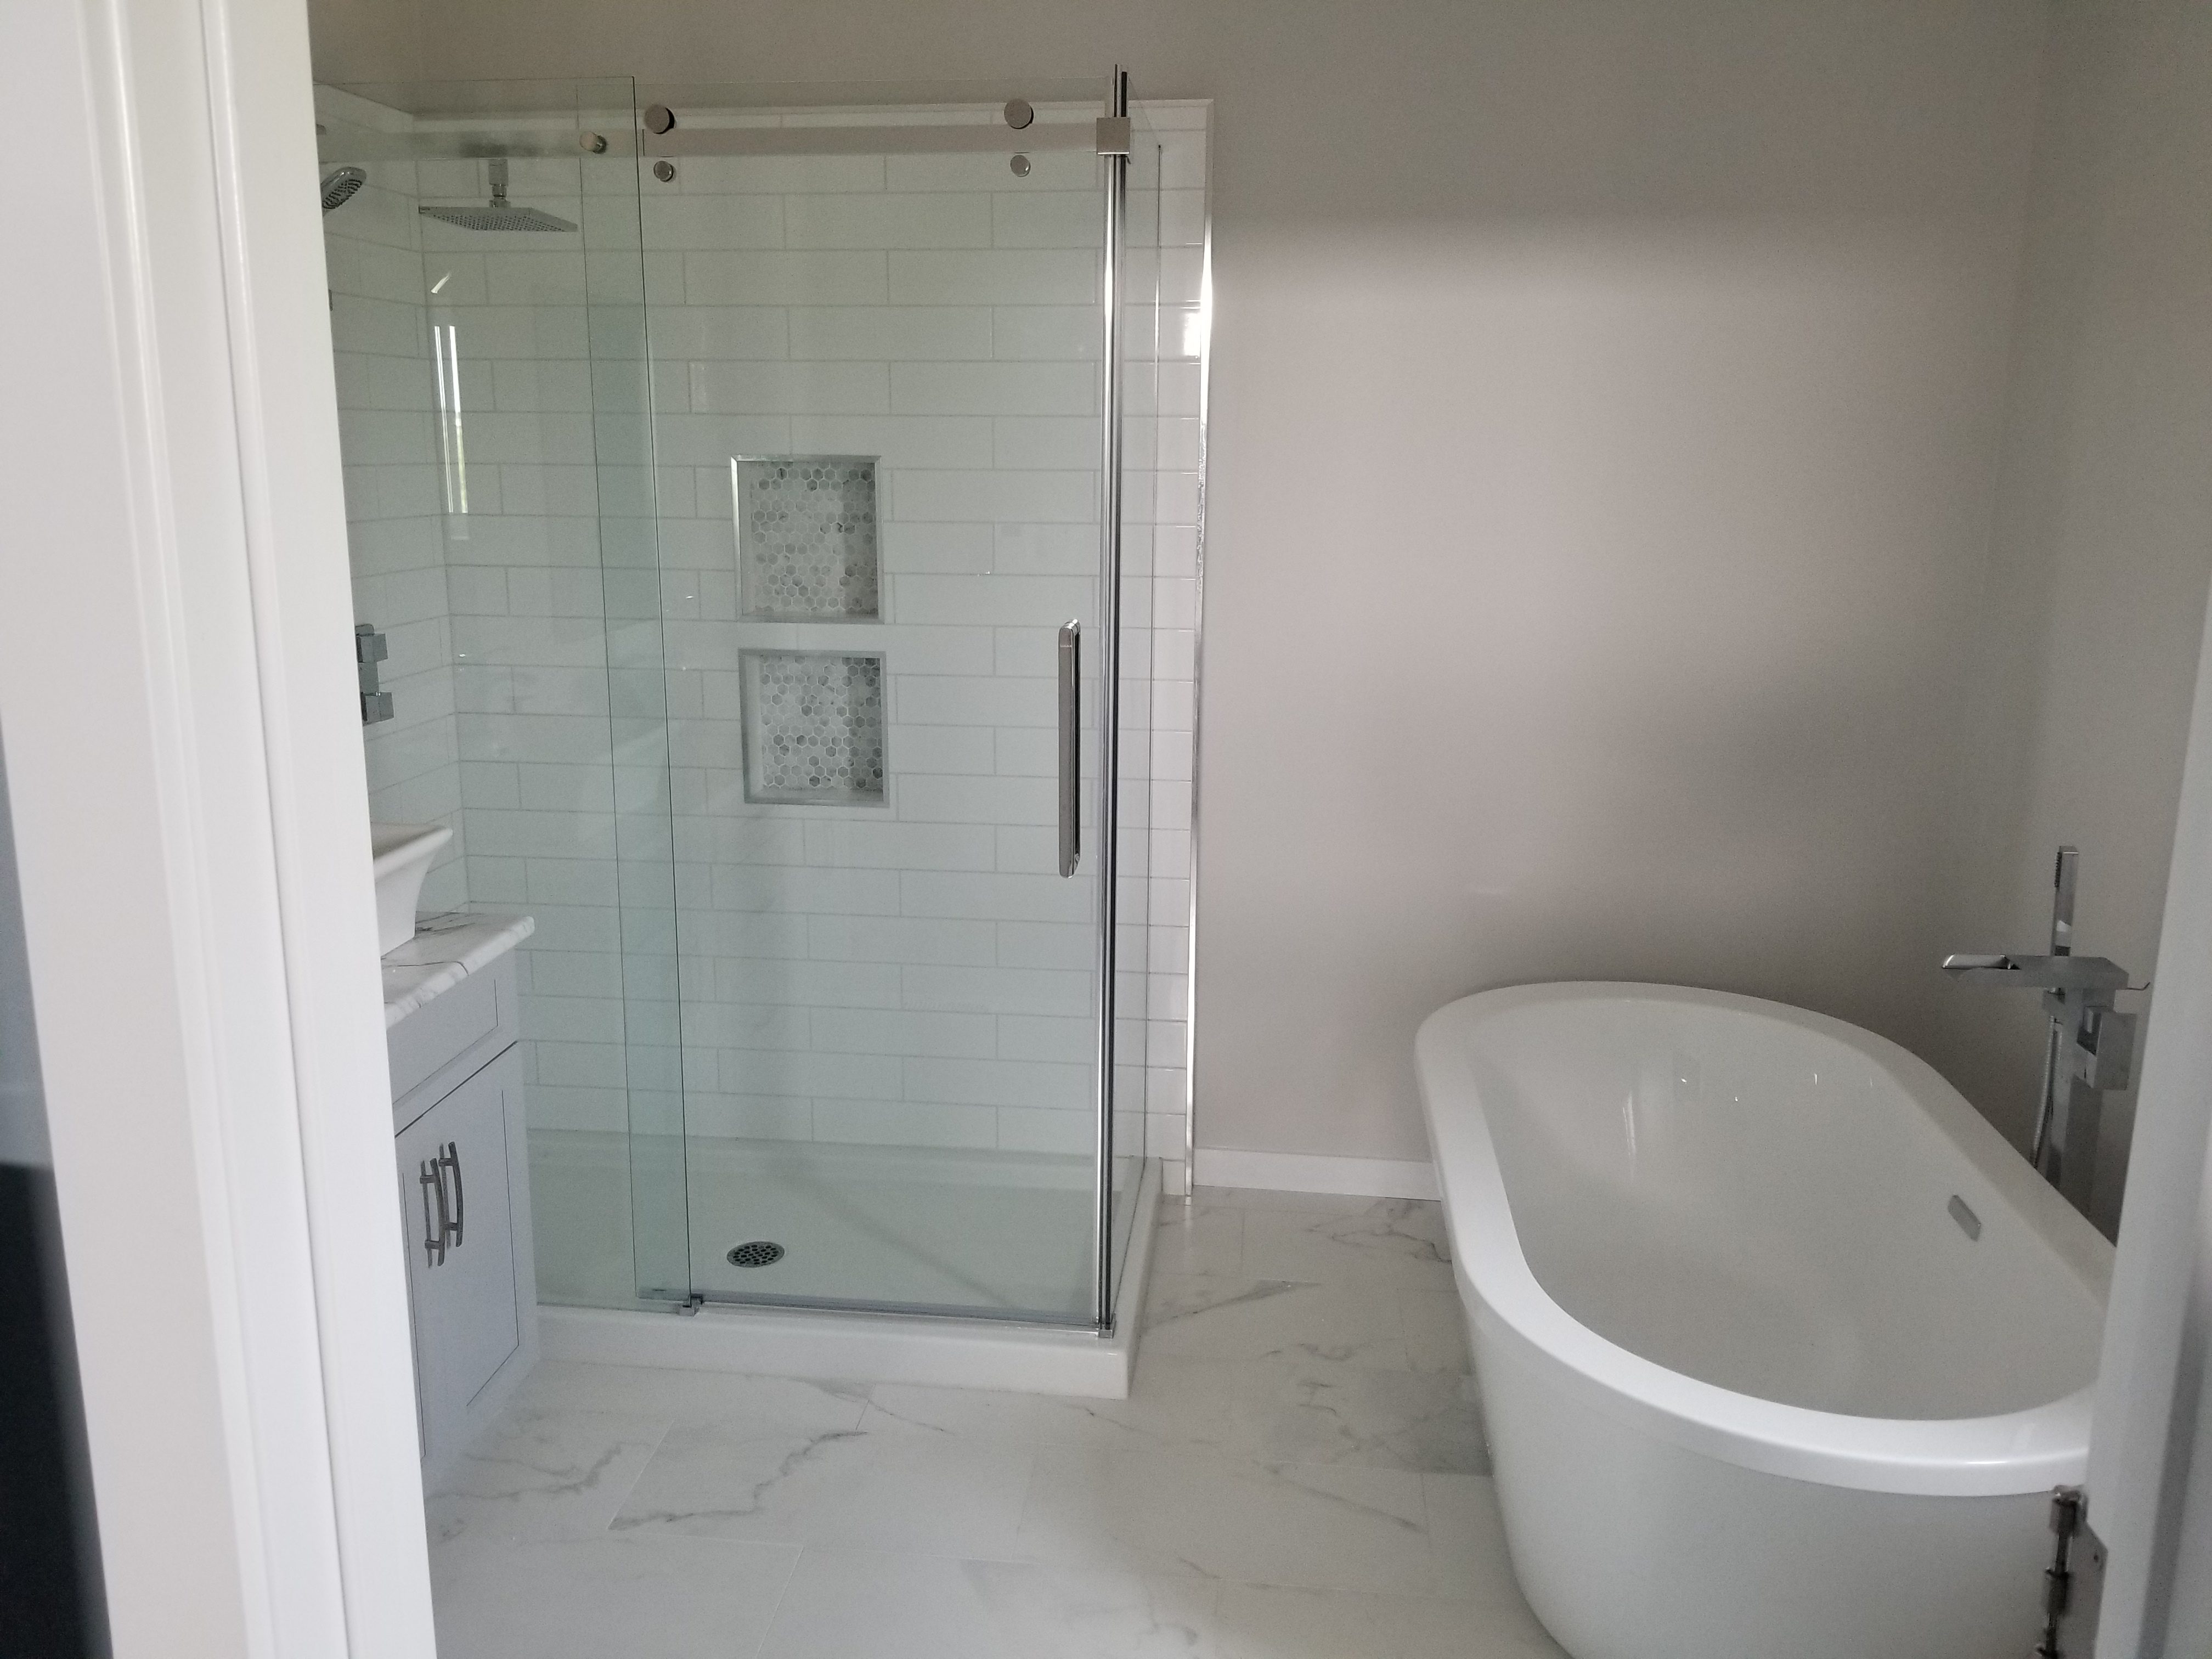 Marble flooring and a new shower area for a bathroom renovation project